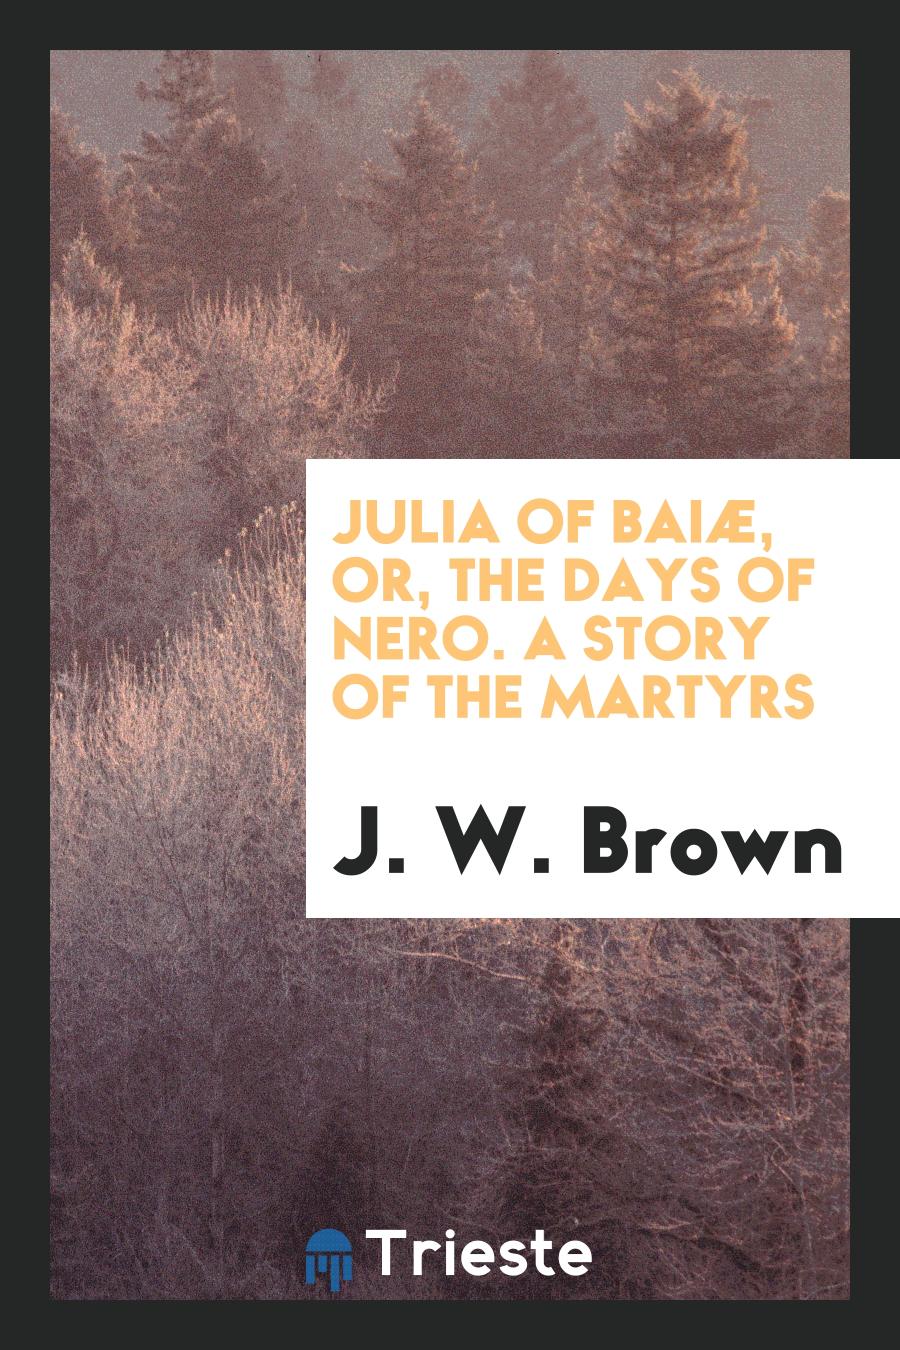 Julia of Baiæ, Or, The Days of Nero. A Story of the Martyrs